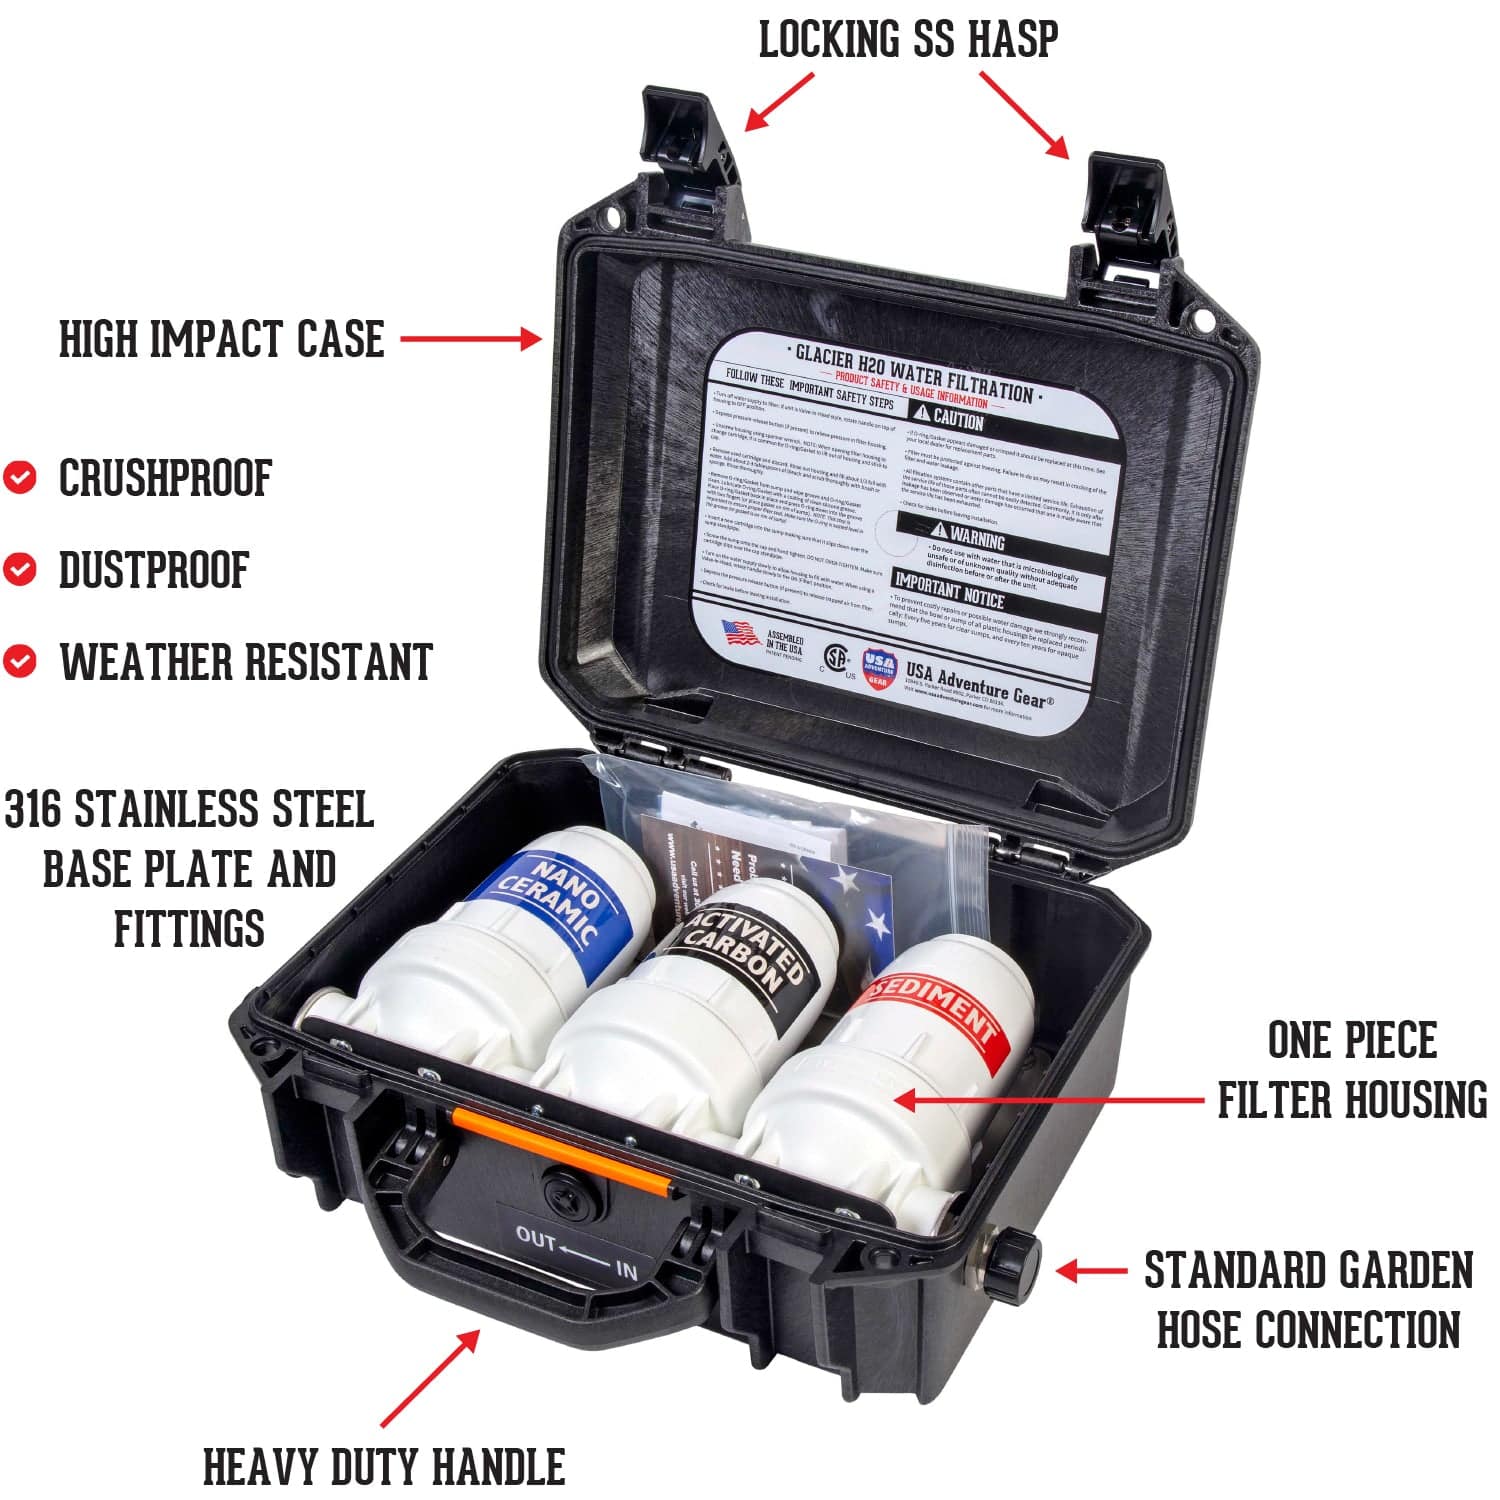 ReadyGear Essentials Auto Kit with First Aid, Water, Shelter, Sleeping